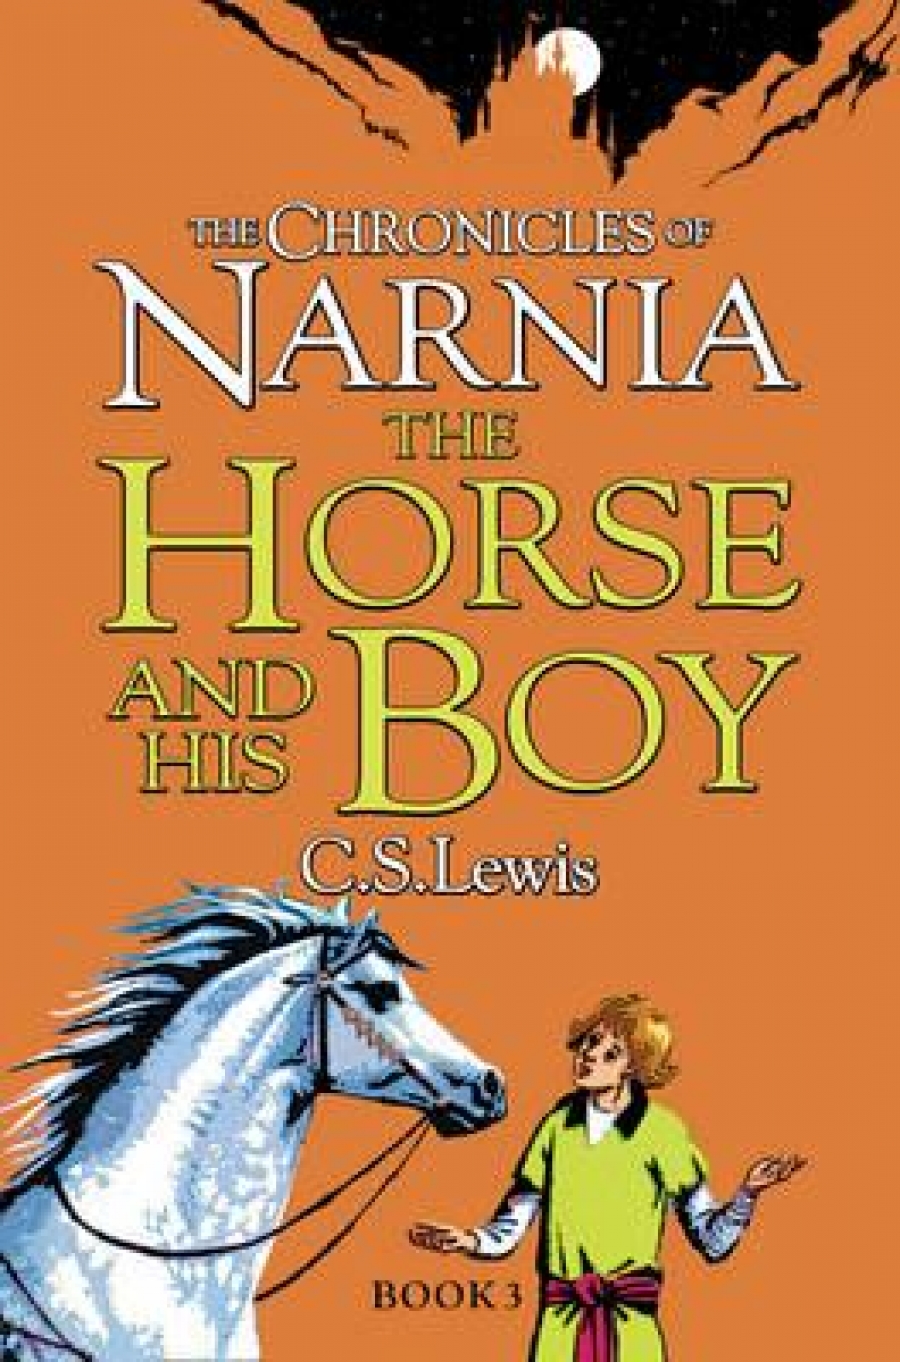 Lewis C. S. Lewis C. S. The Chronicles of Narnia 3. The Horse and His Boy 